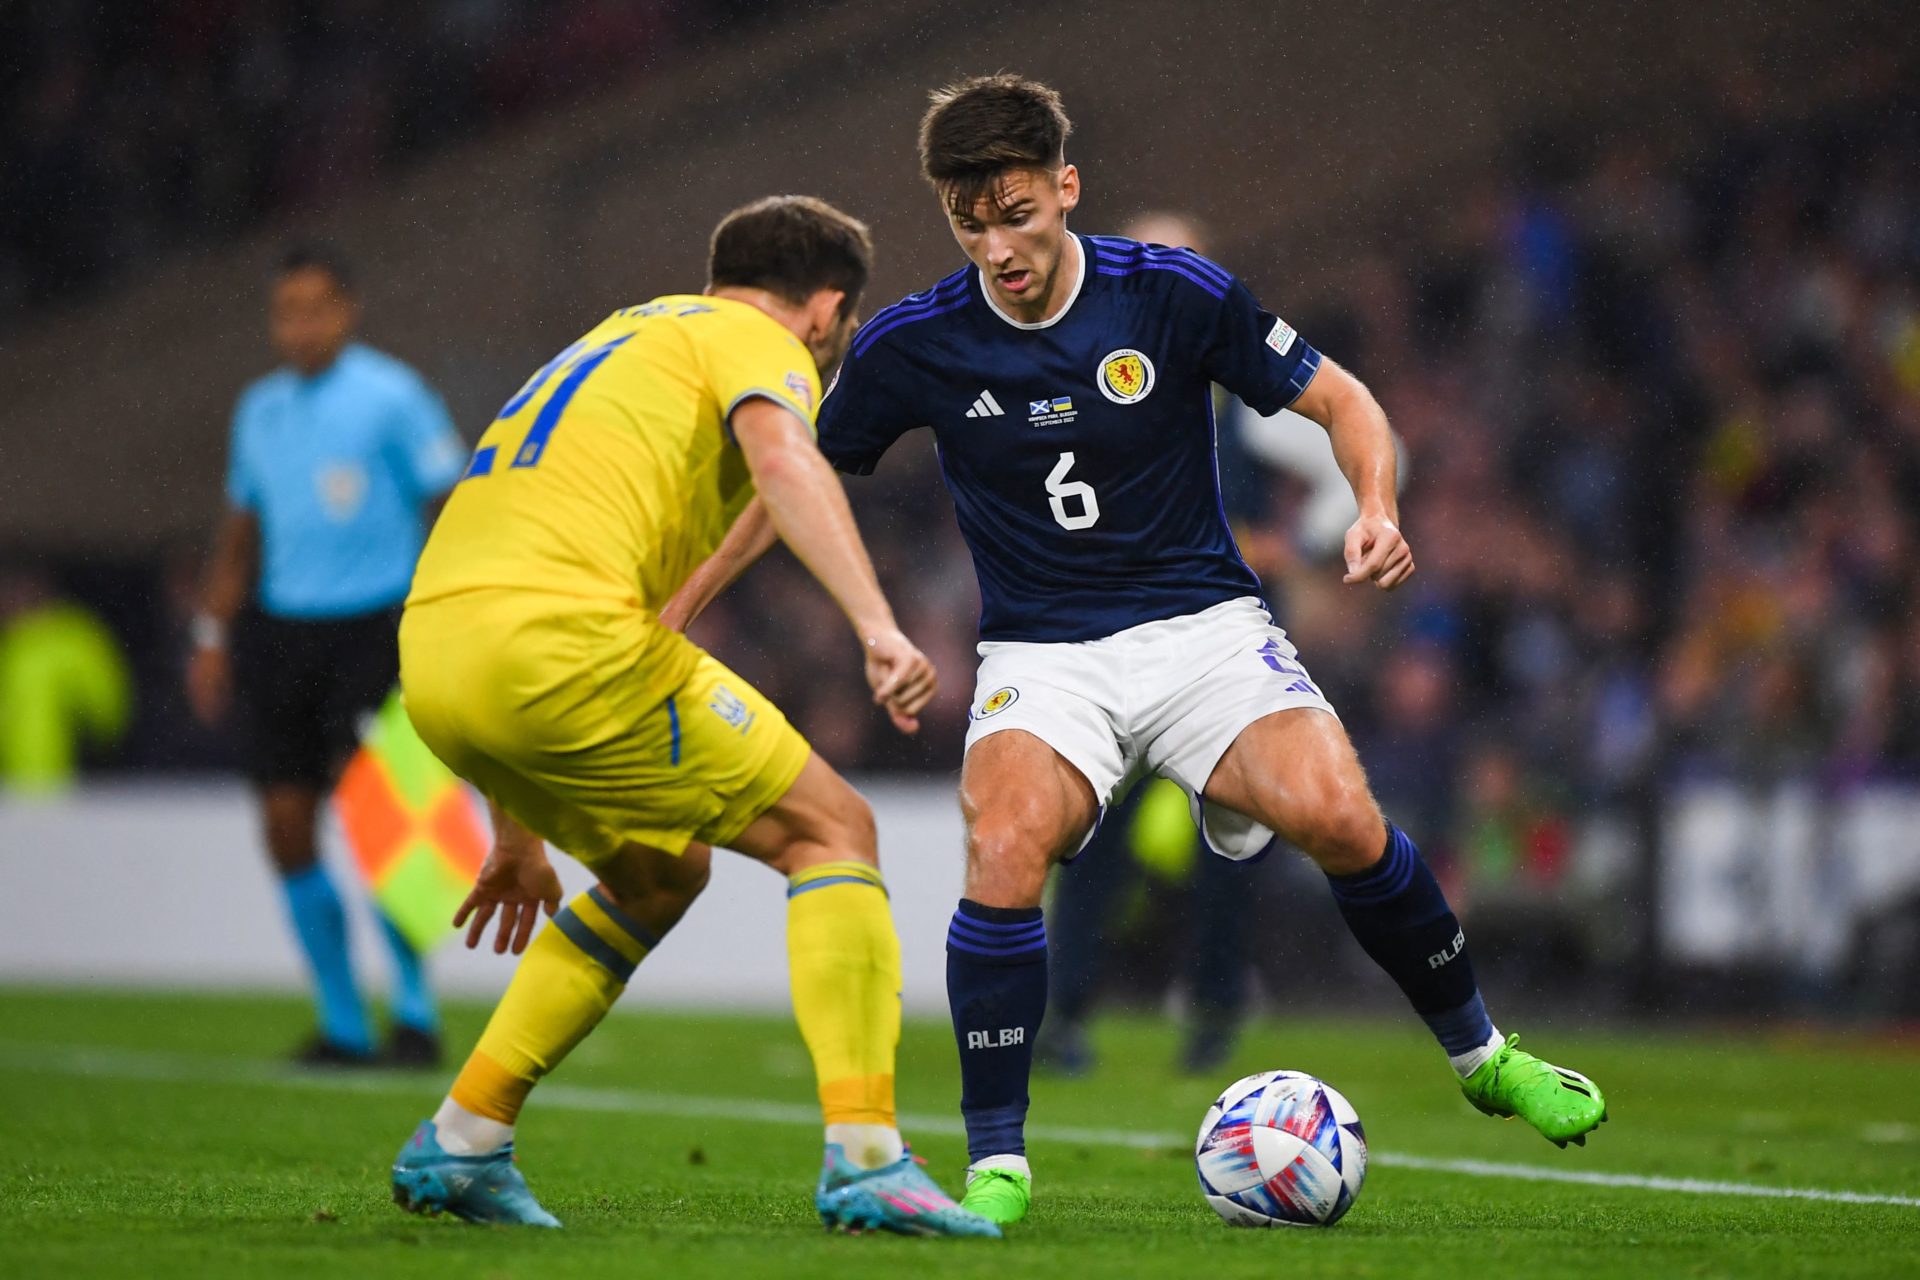 Tierney impressed by Taylor's form